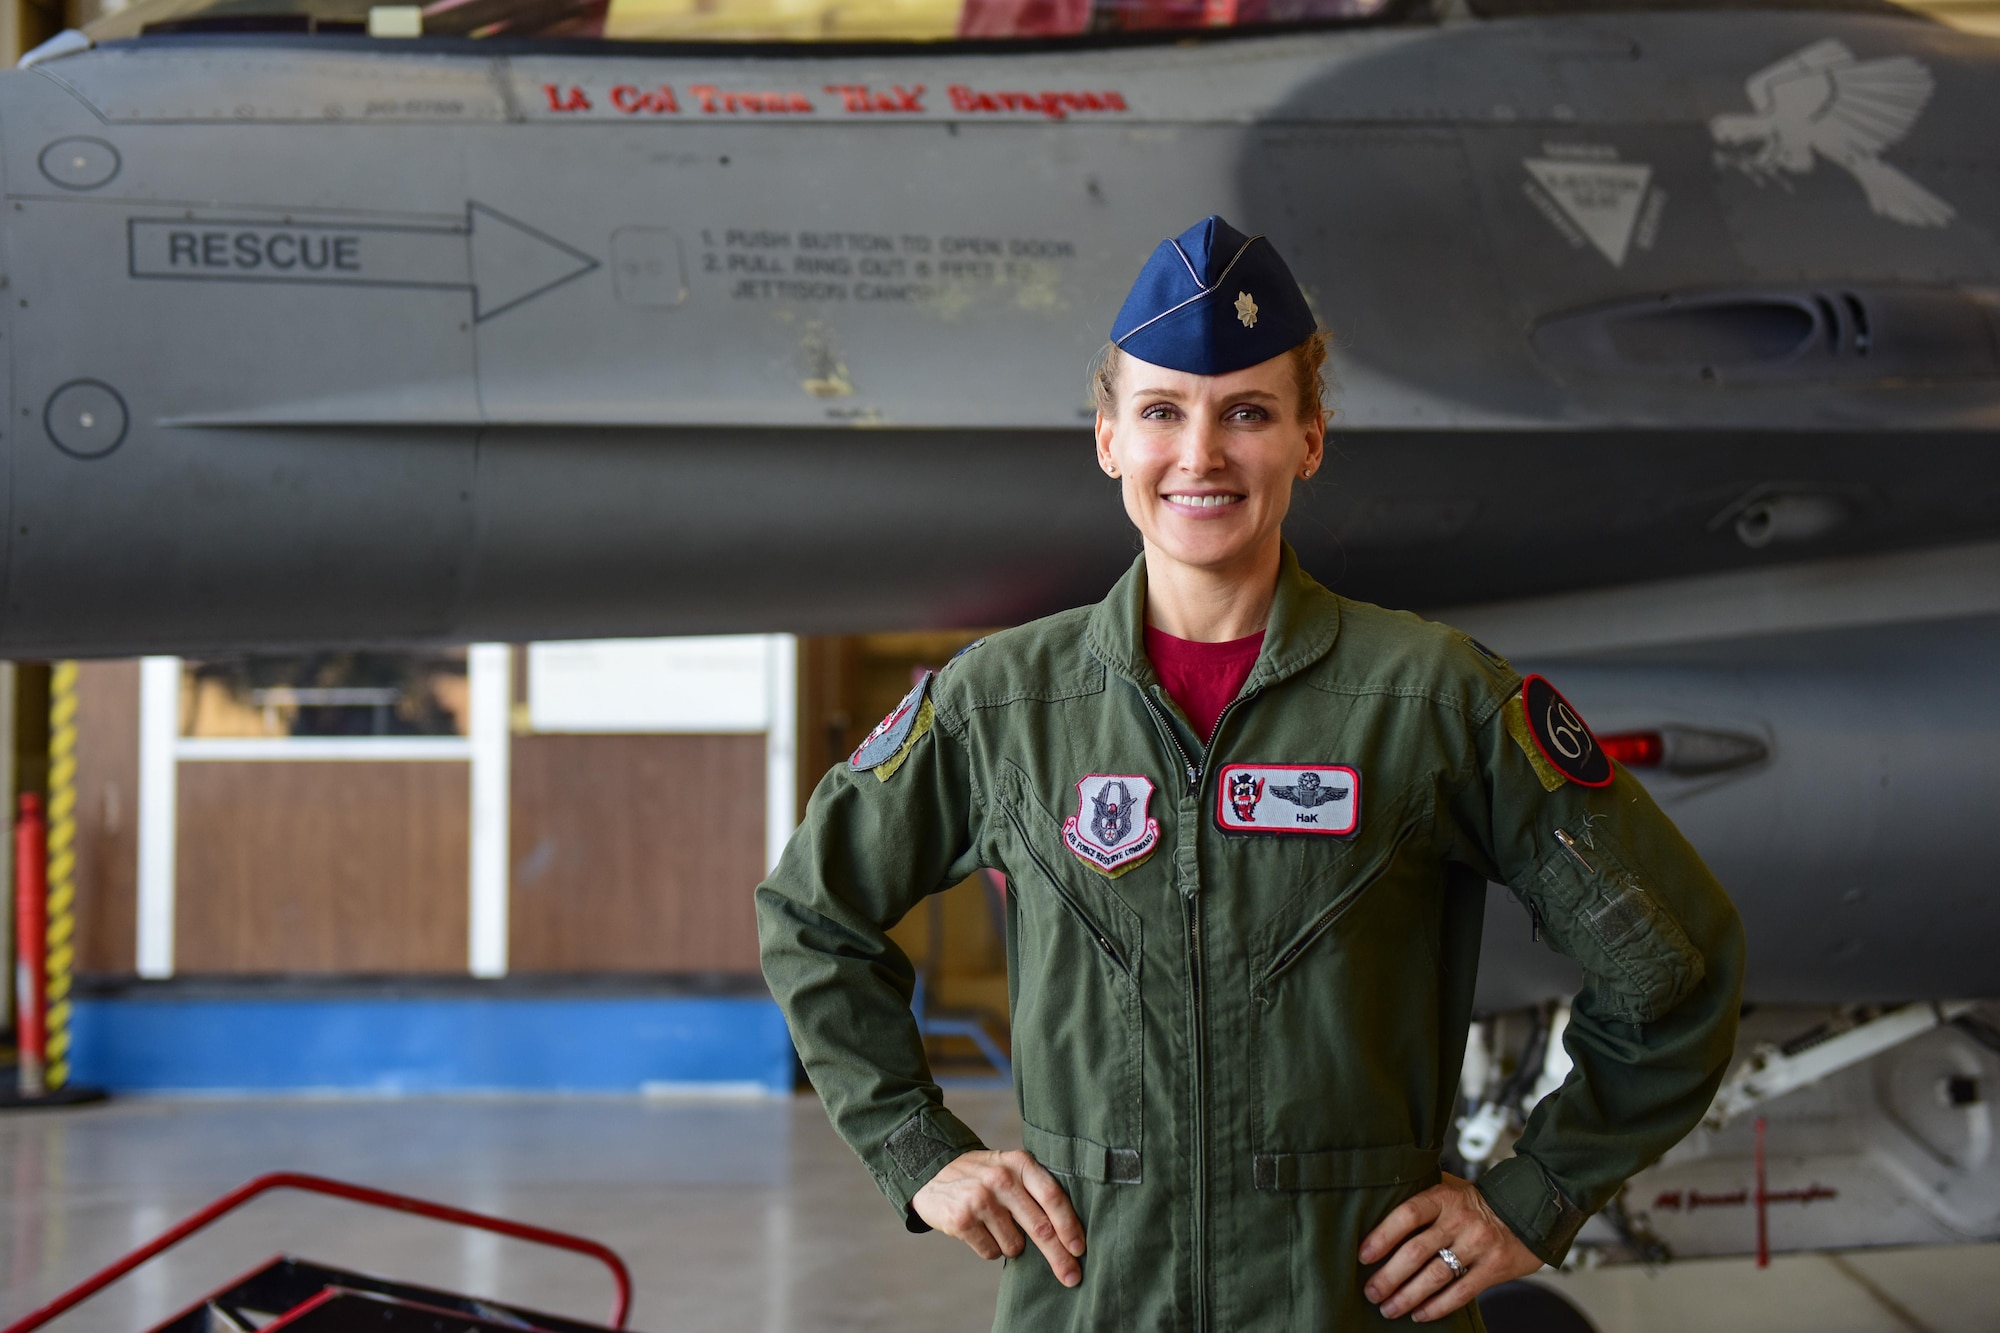 Lt. Col. Trena Savageau, incoming 69th Fighter Squadron commander, poses with an F-16 after the 69 FS change of command ceremony Oct. 10.